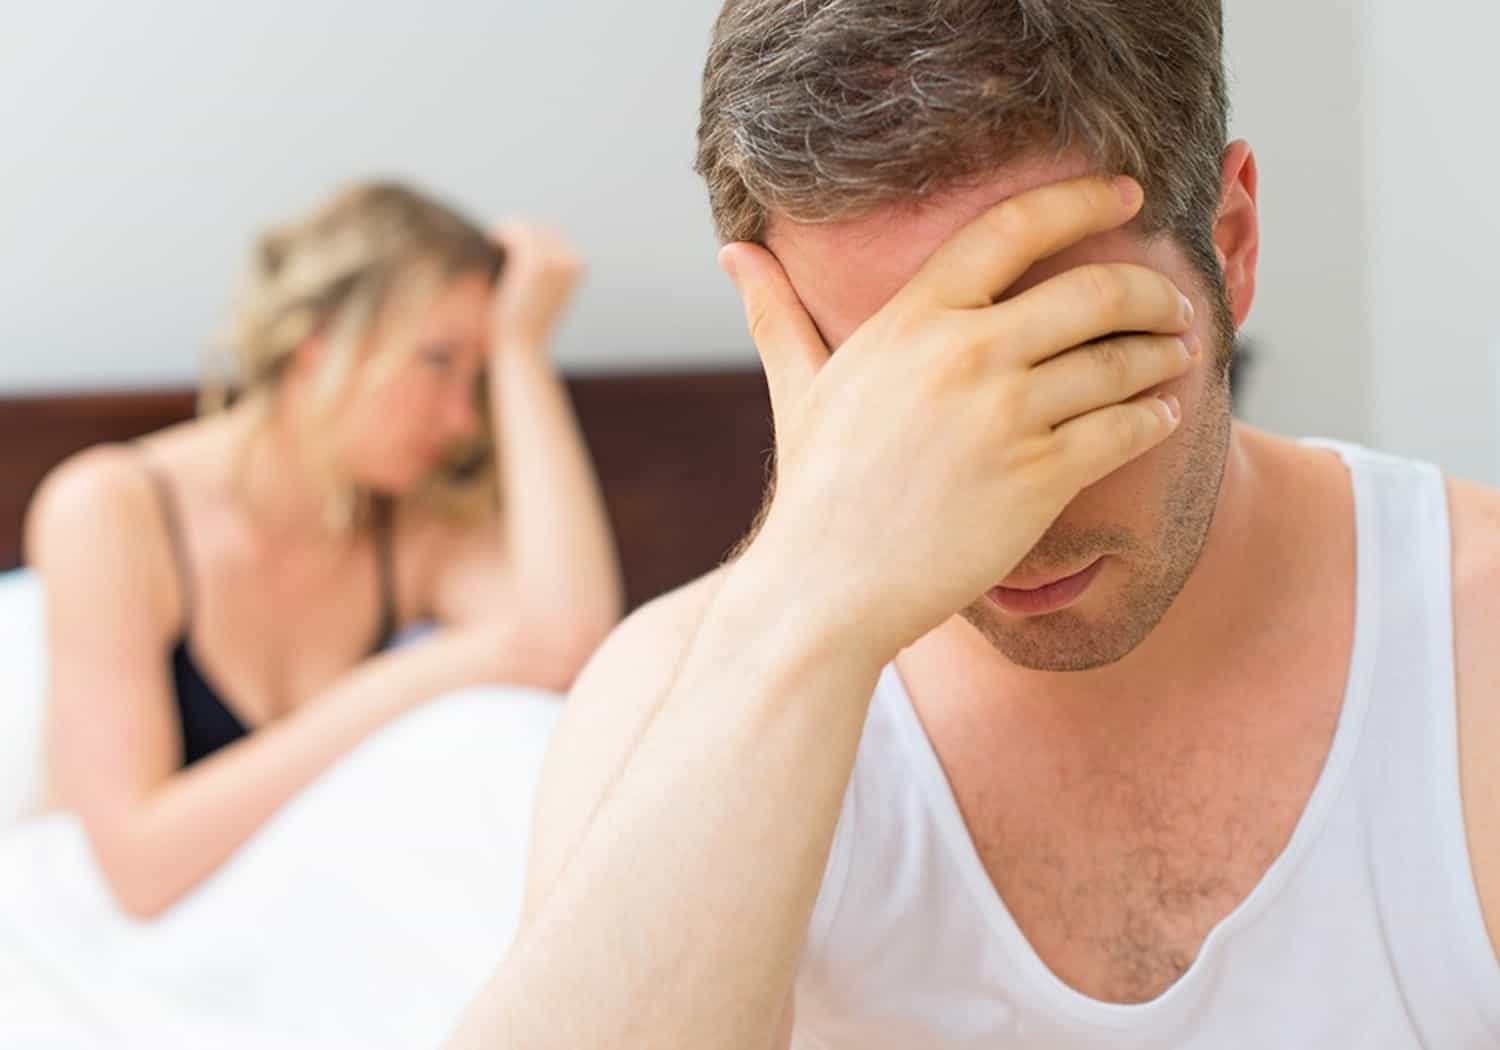 Erectile dysfunction: Causes and Treatment